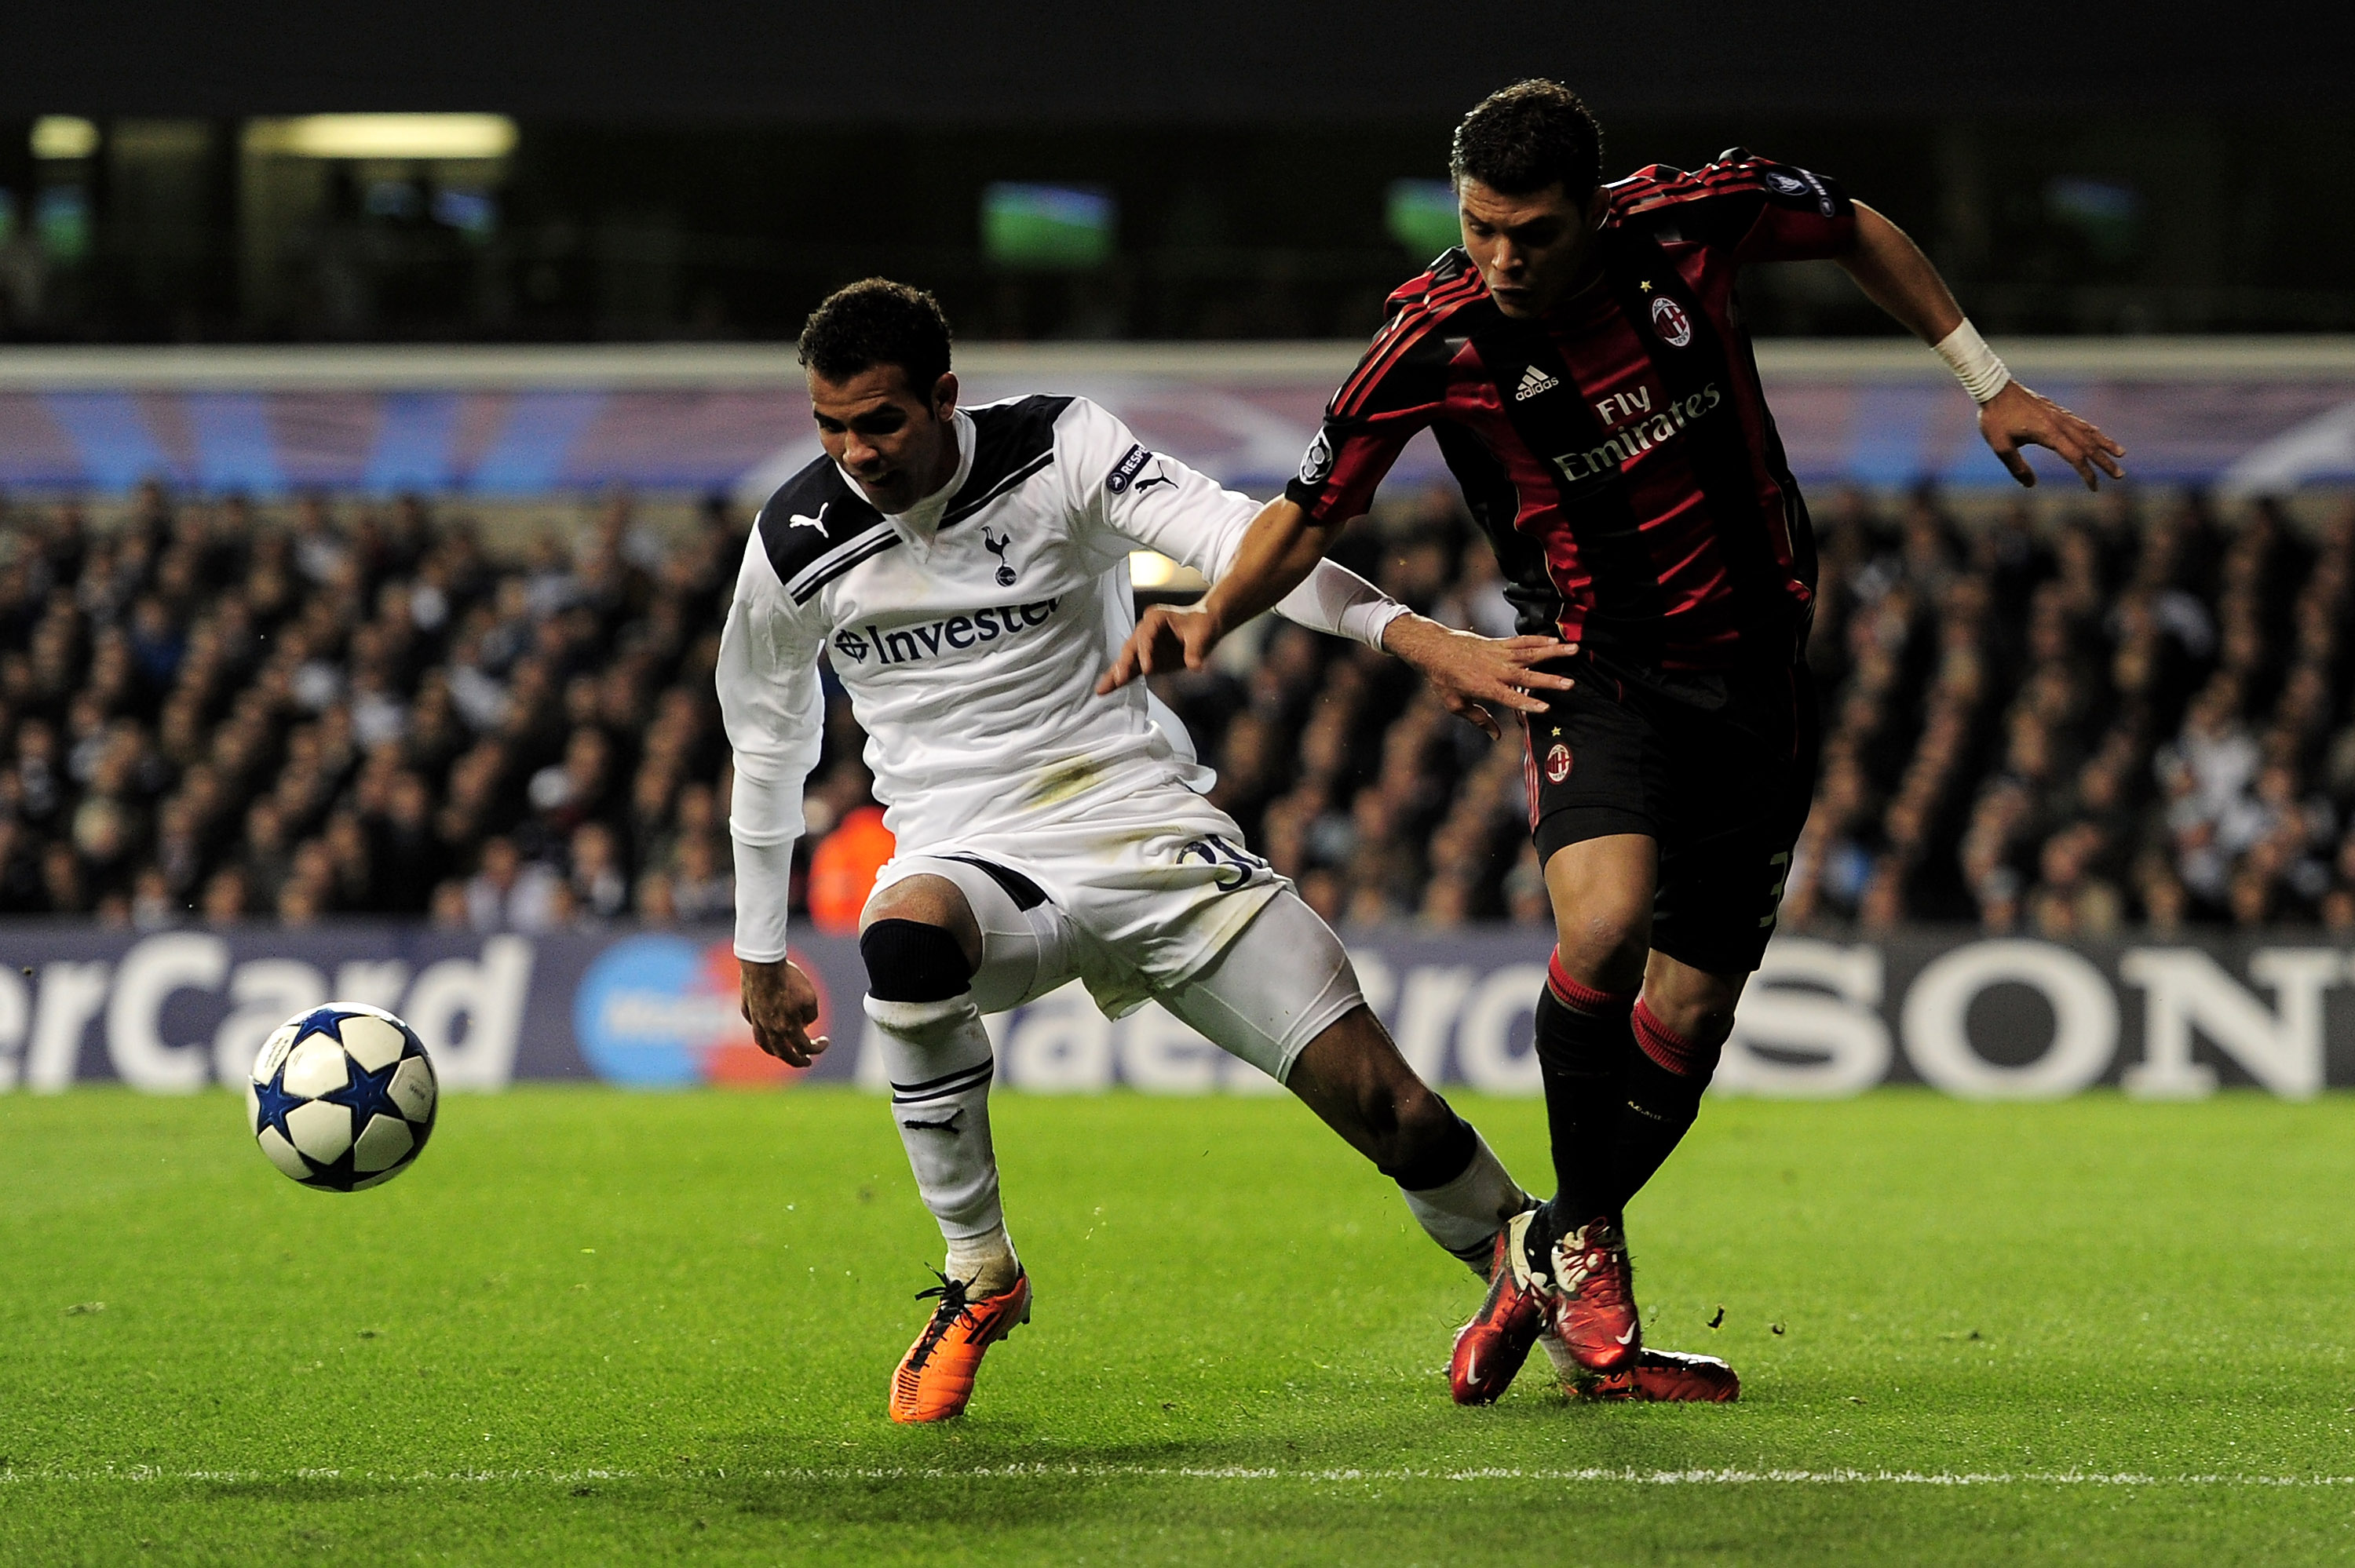 LONDON, ENGLAND - MARCH 09:  Sandro (L) of Tottenham vies with Thiago Silva of Milan during the UEFA Champions League round of 16 second leg match between Tottenham Hotspur and AC Milan at White Hart Lane on March 9, 2011 in London, England.  (Photo by Ja